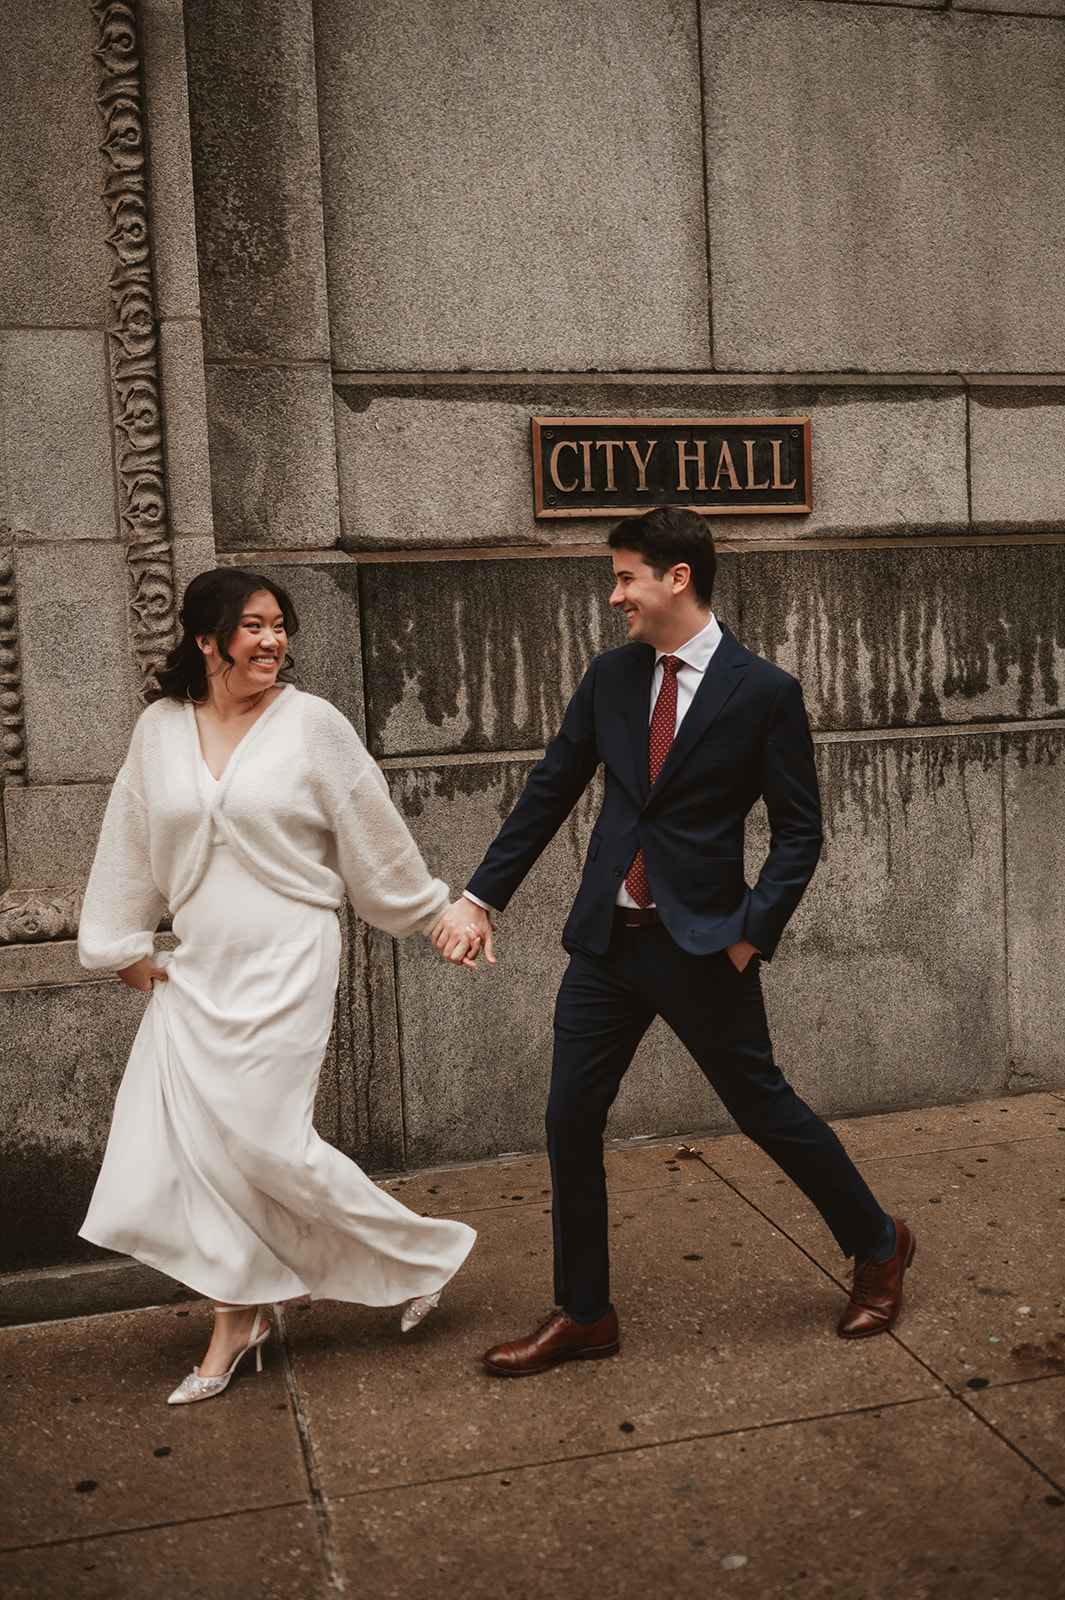 Intimate rainy day Chicago elopement wedding photography - in front of the city hall sign